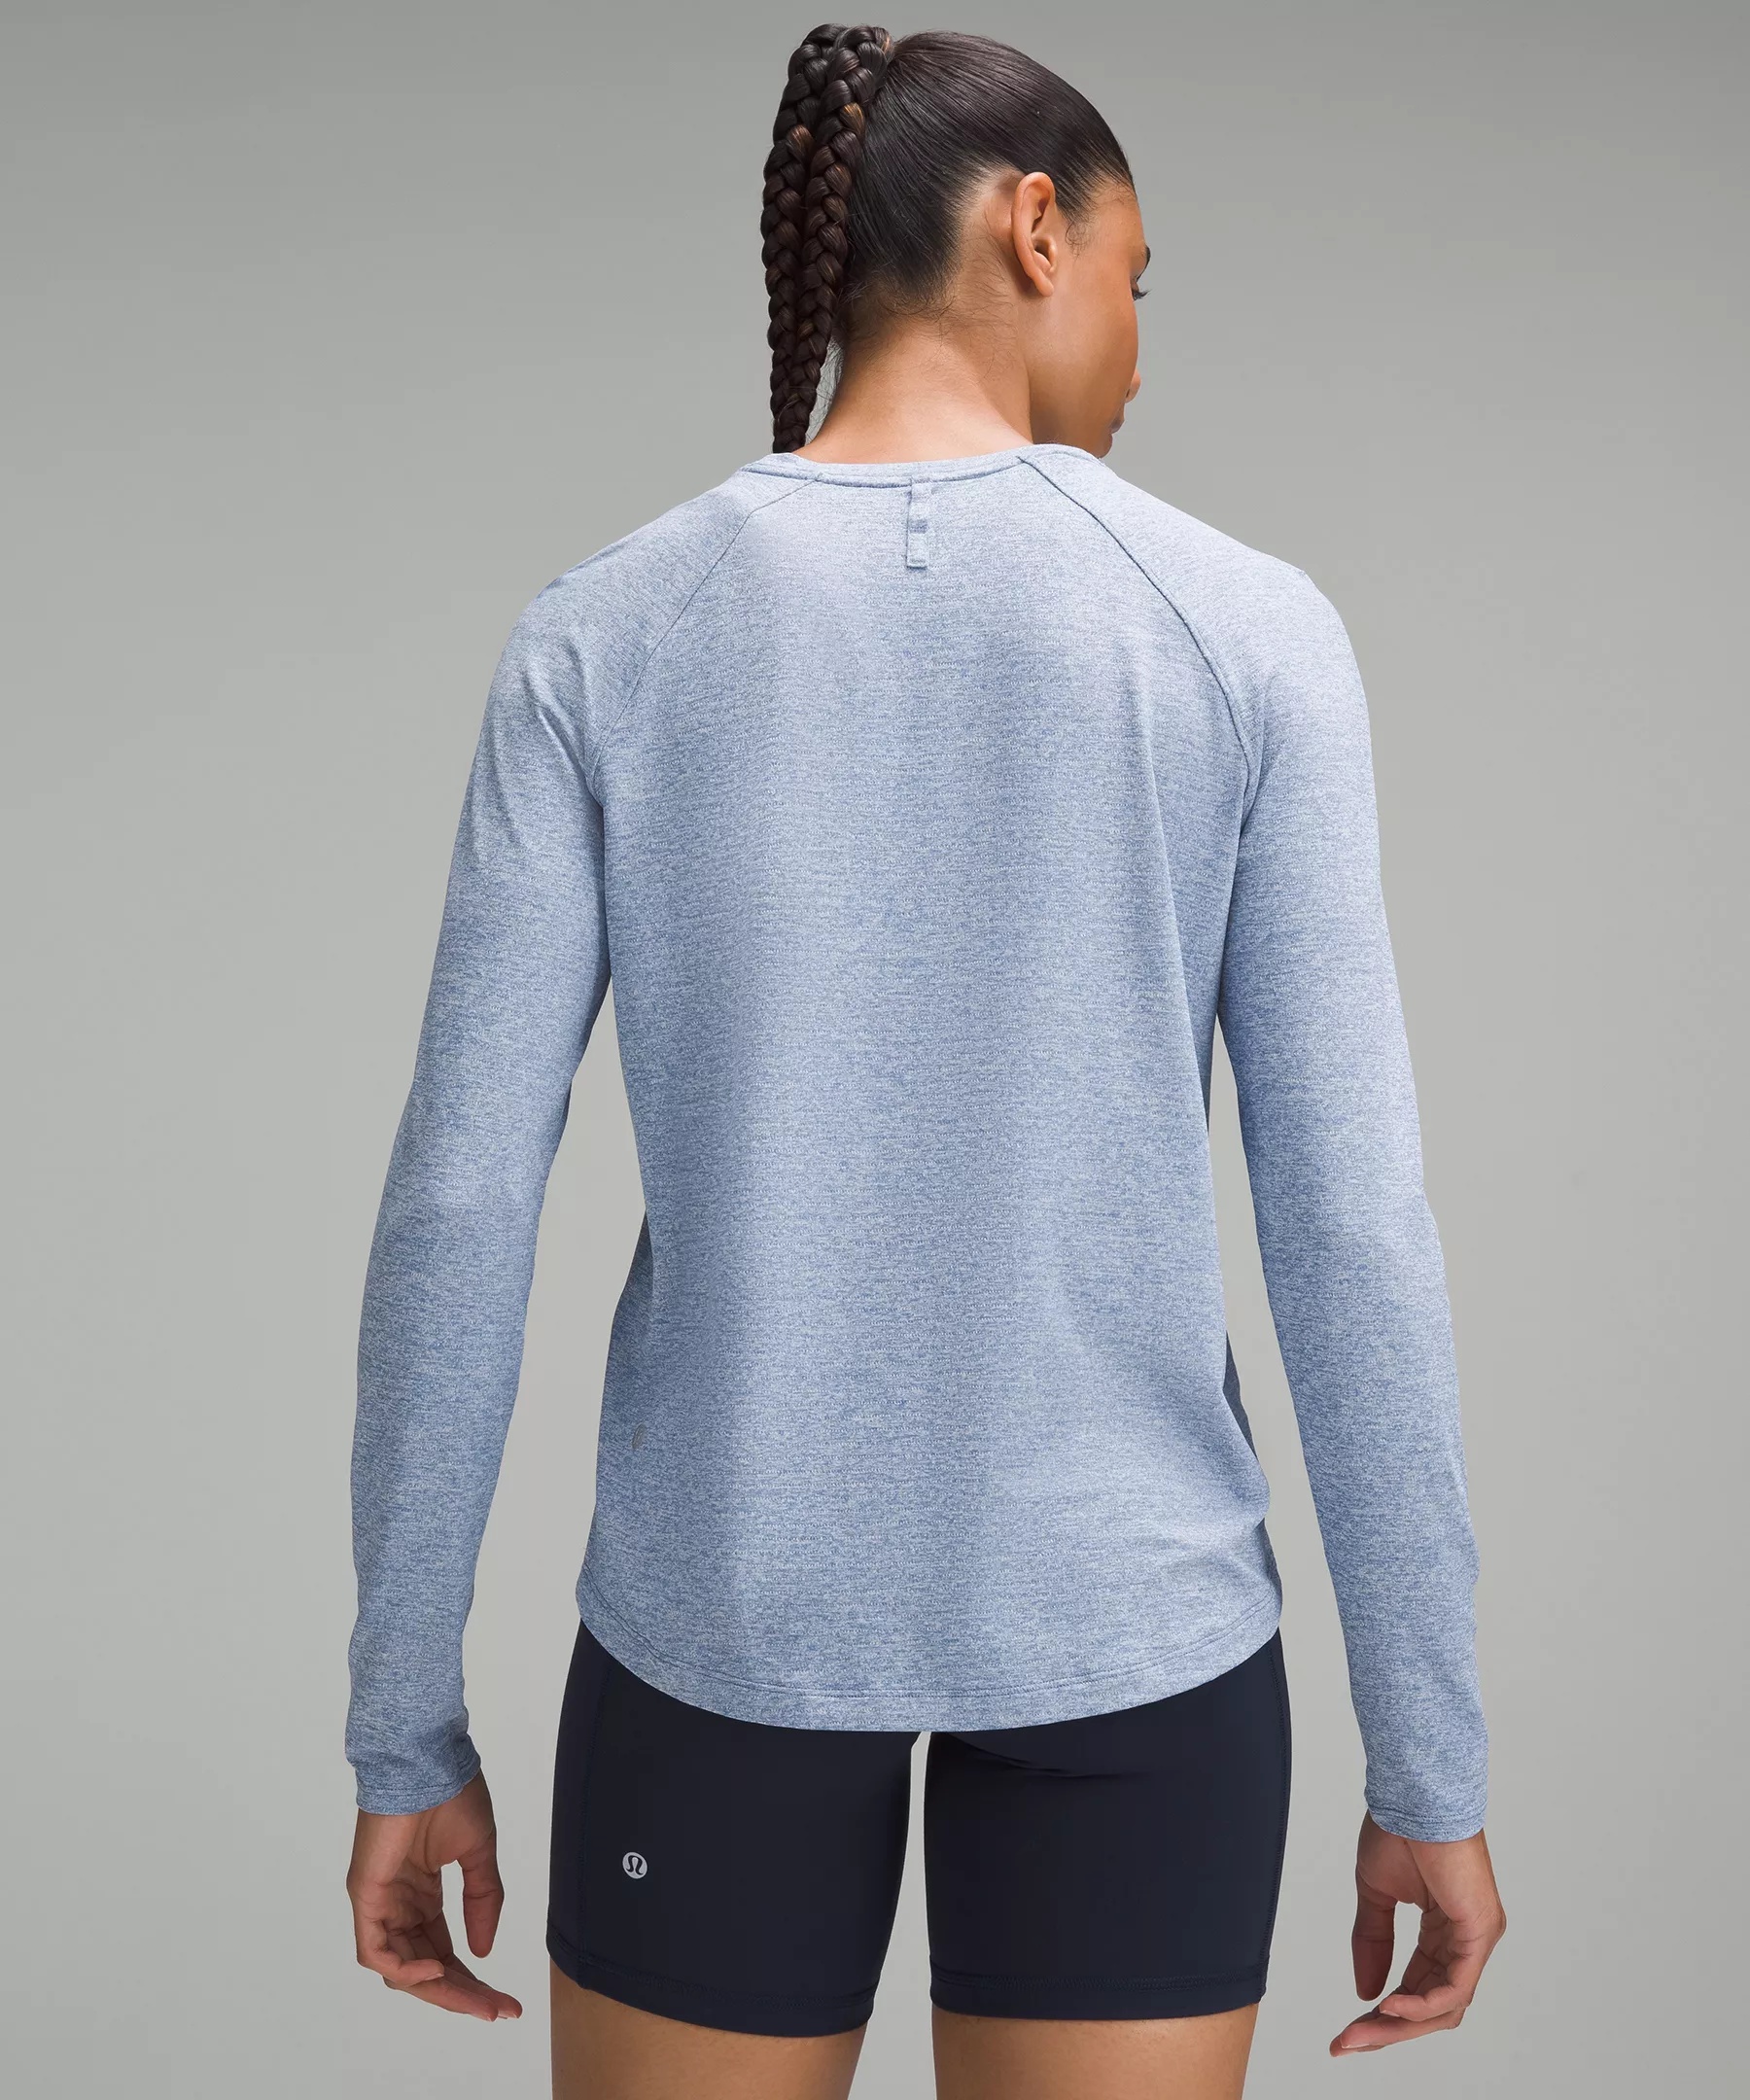 License to Train Classic-Fit Long-Sleeve Shirt - 3